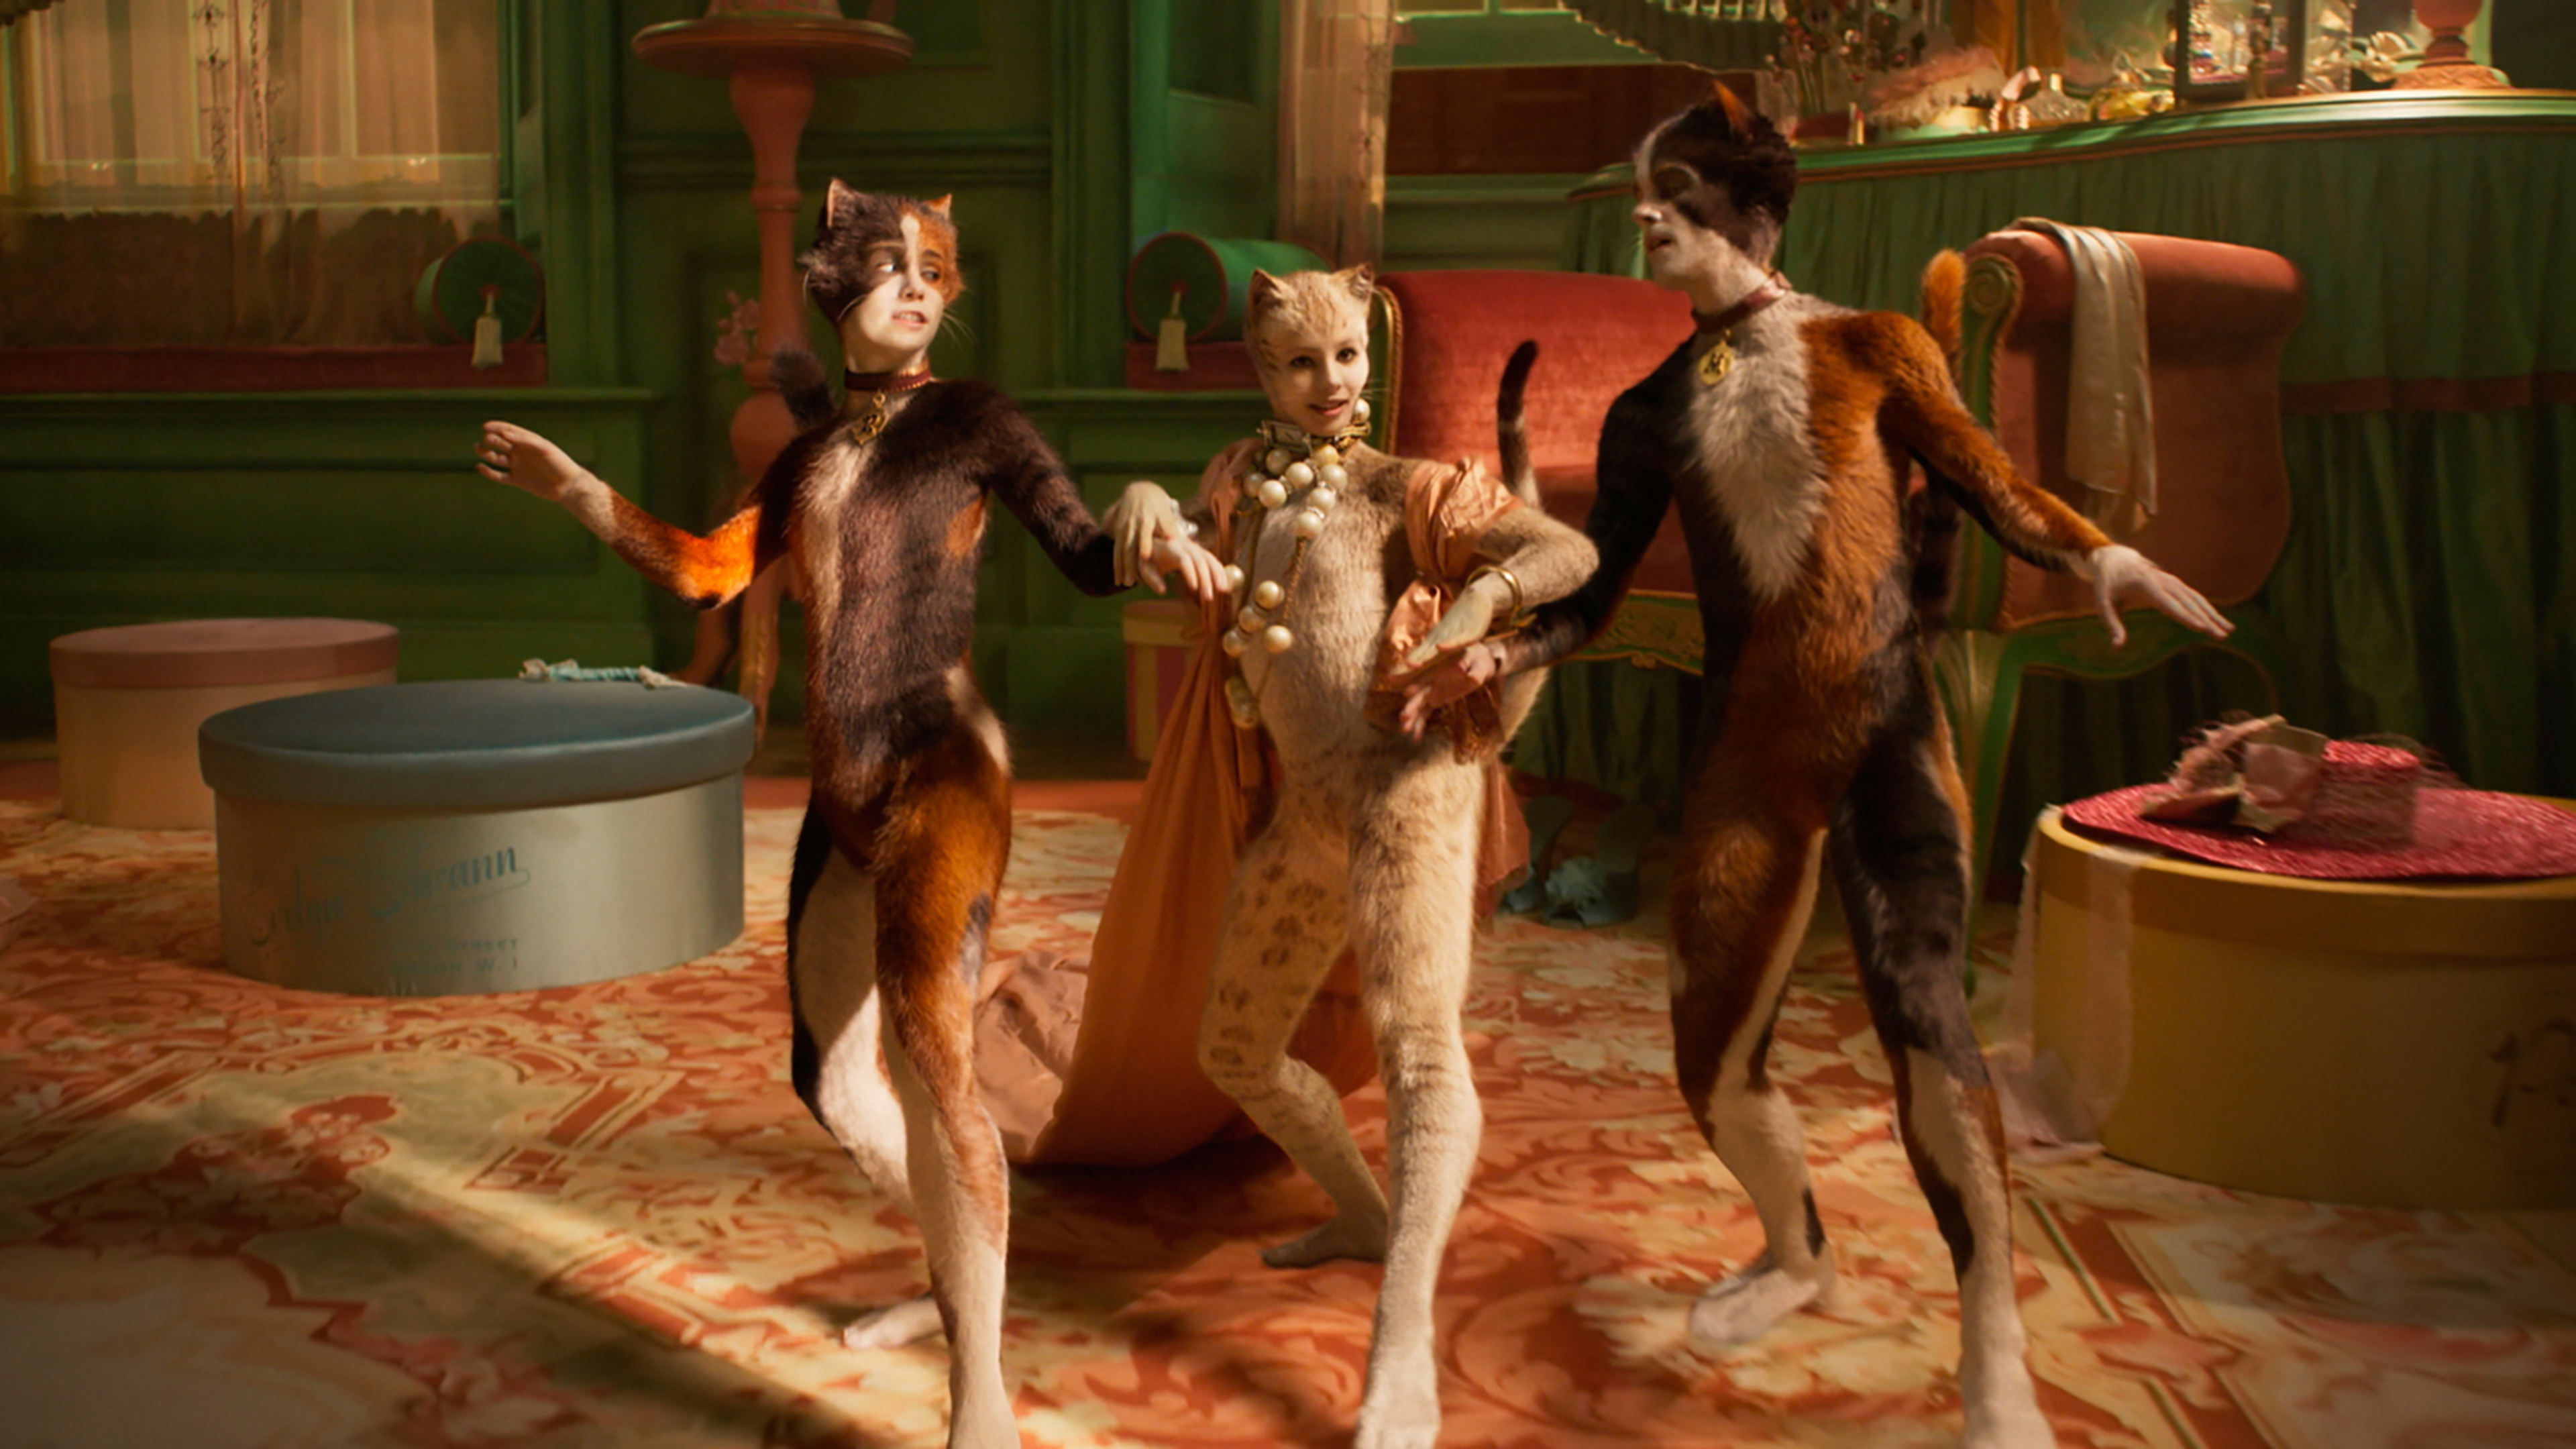 The rumored ‘butthole cut’ of ‘Cats’ is the quarantine relief we need